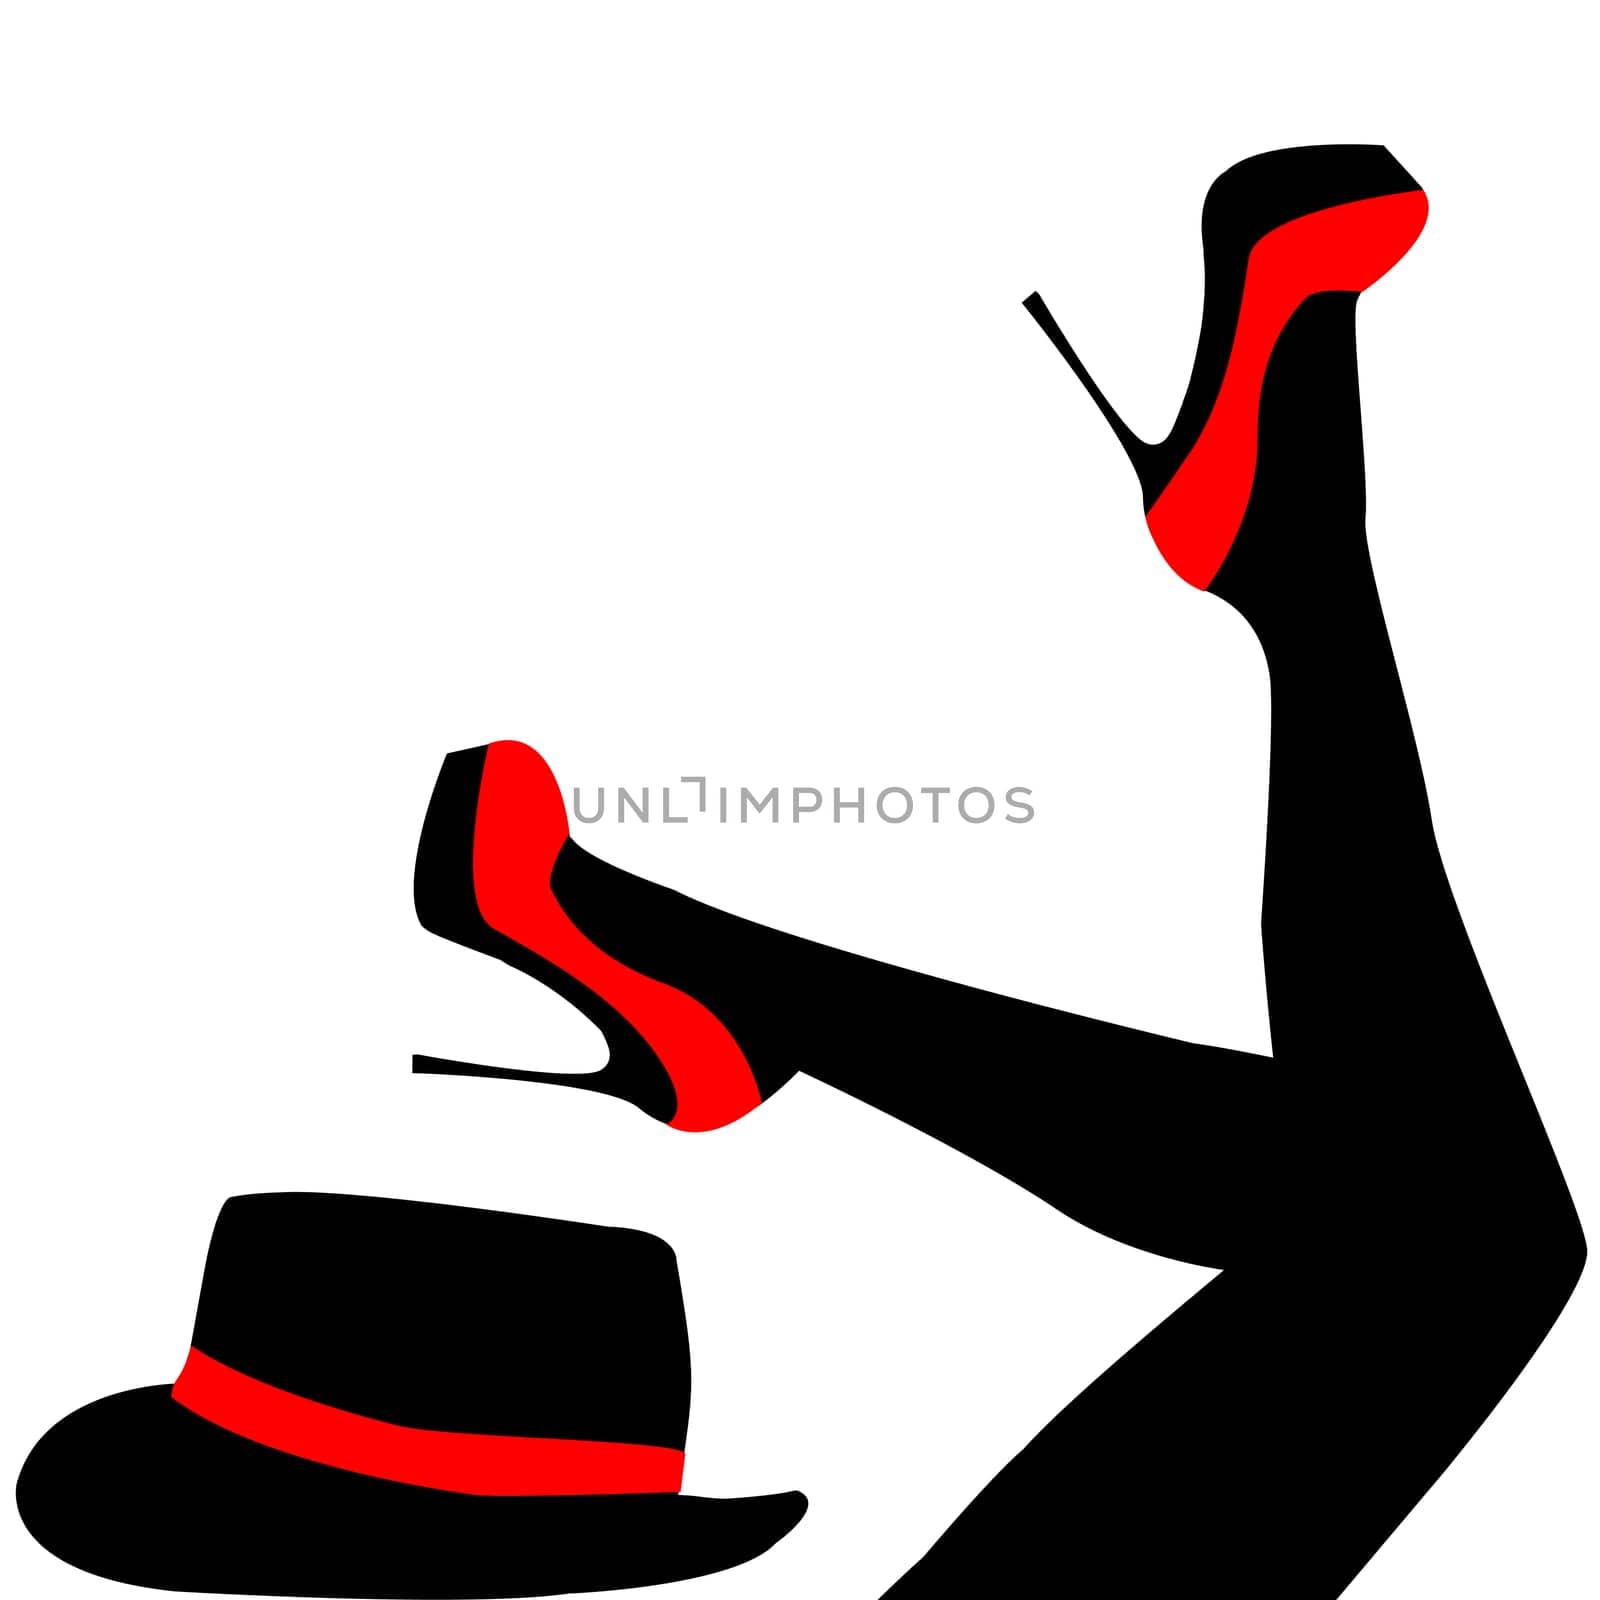 Legs in black tights with red shoes and hat next to them by hibrida13